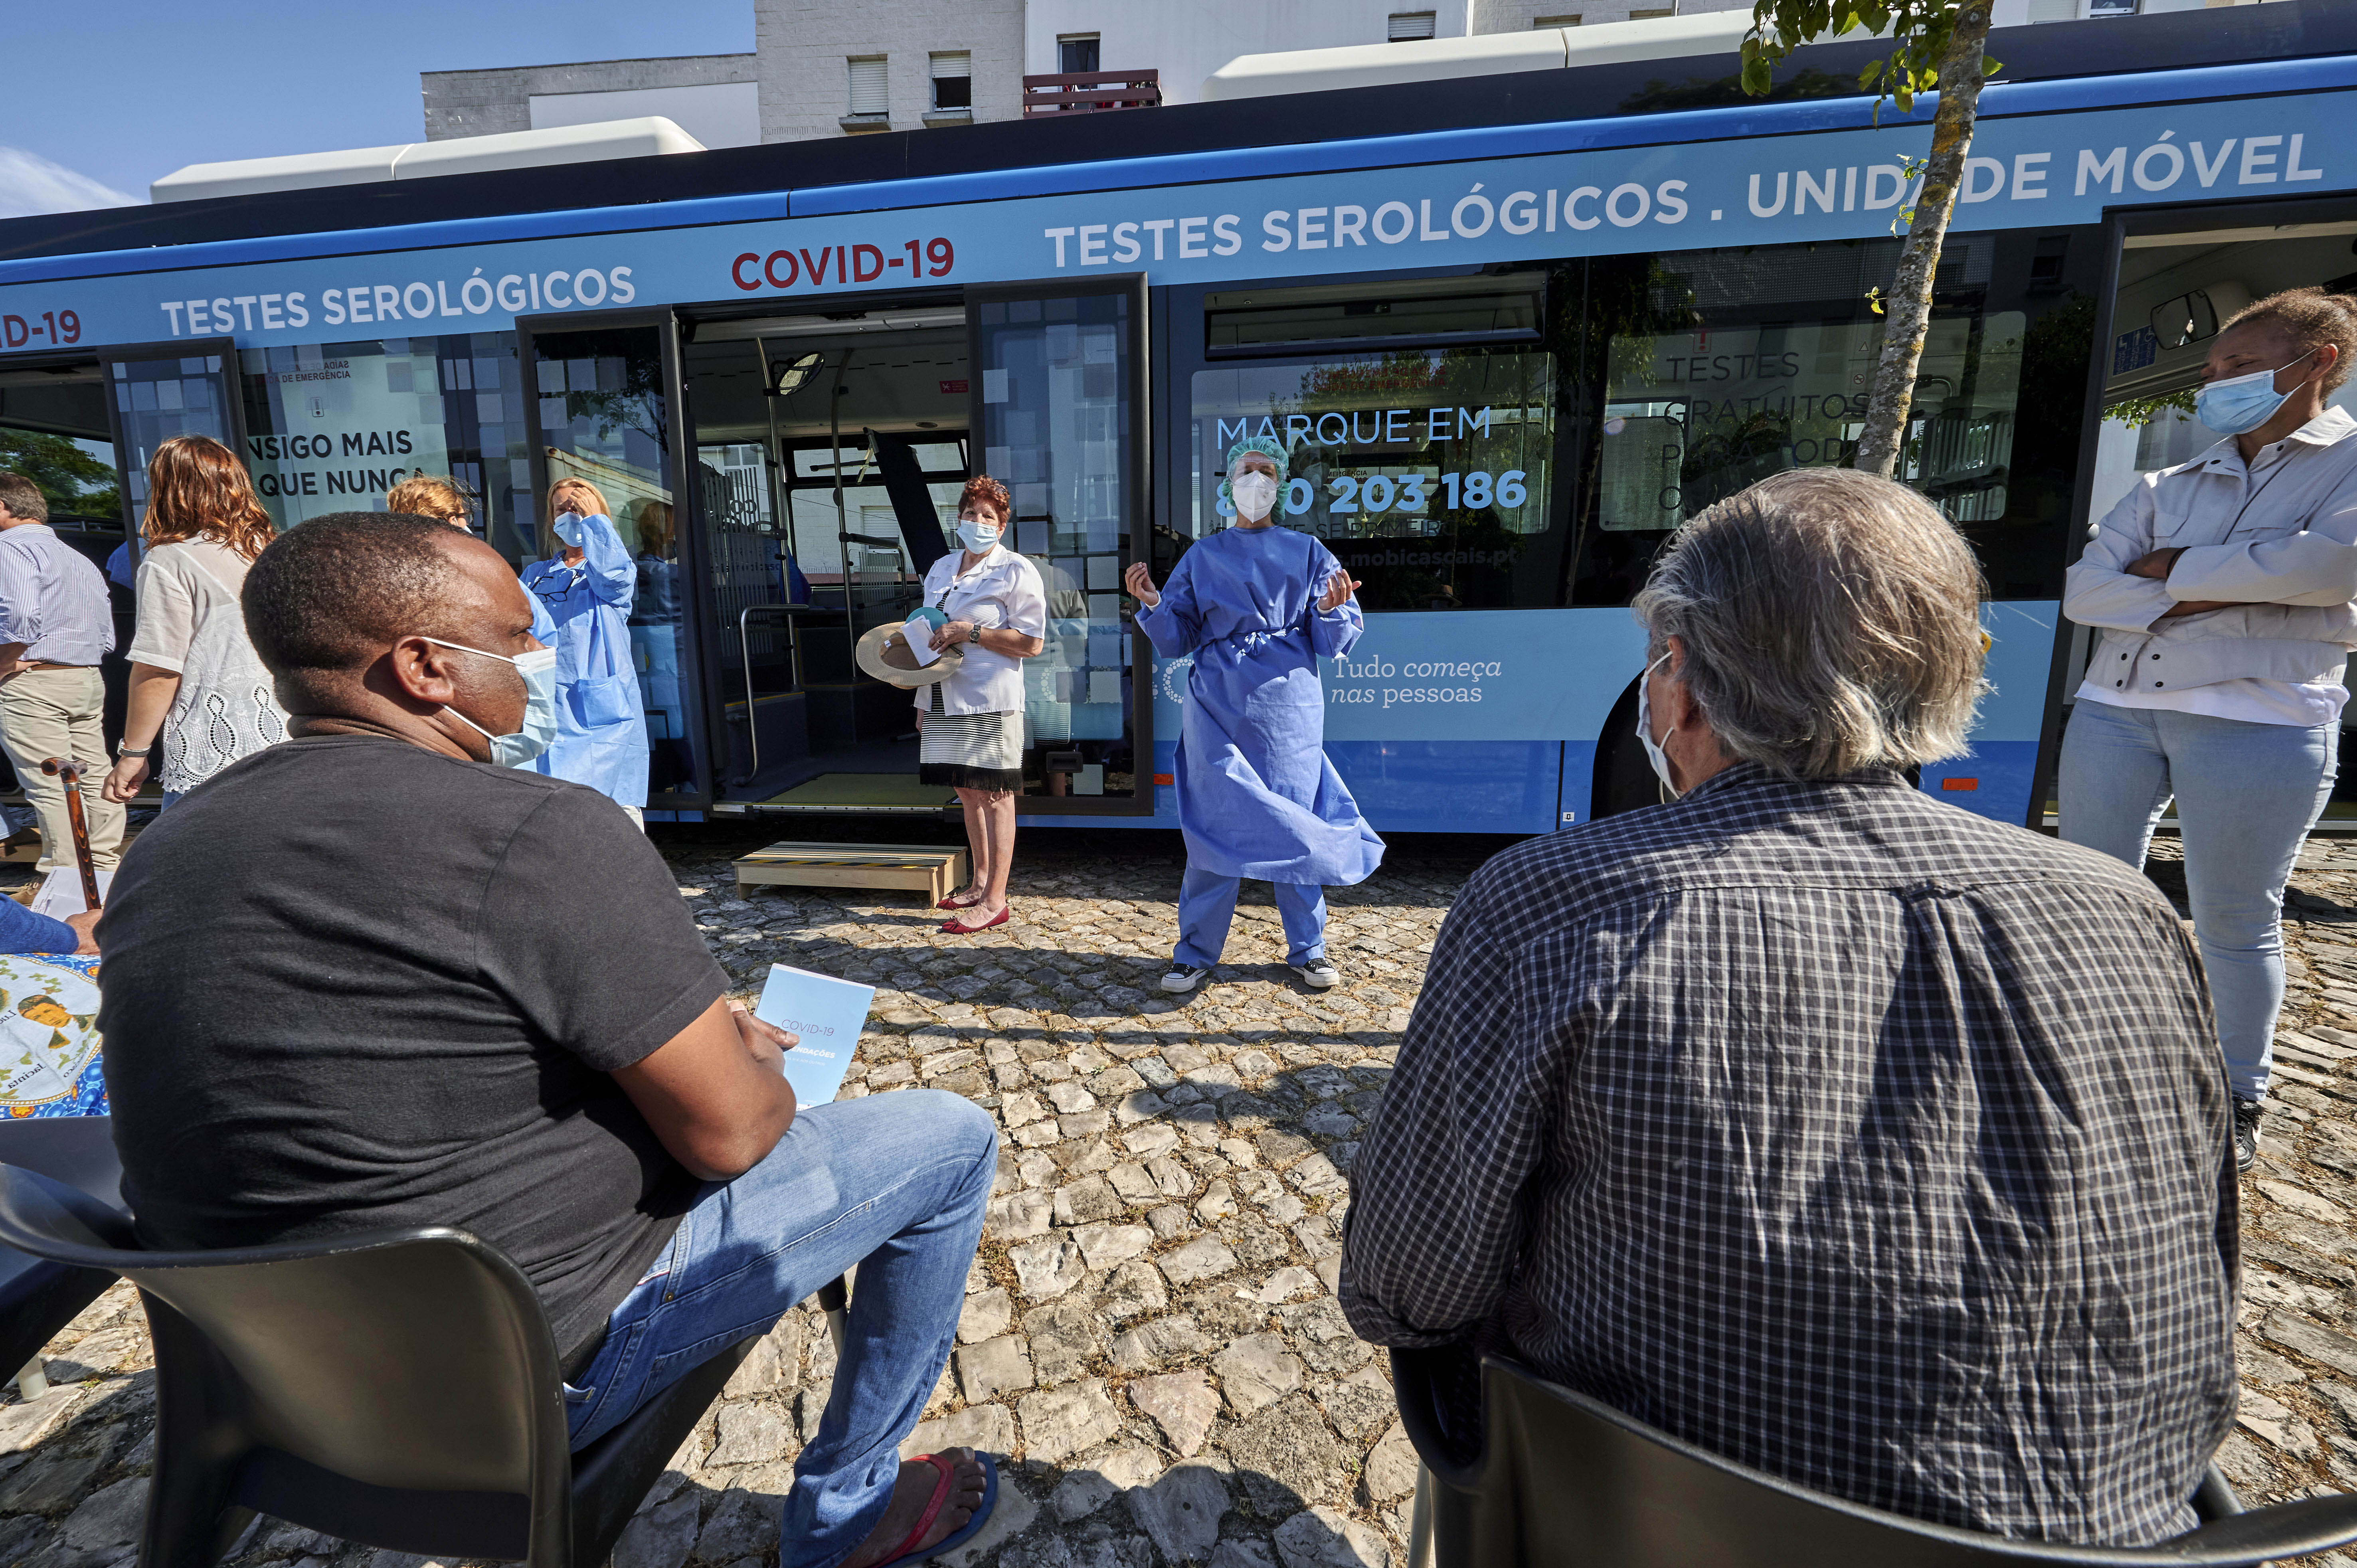 People in Cascais, Portugal, are briefed by a health technician before being tested for Covid-19 on June 23.